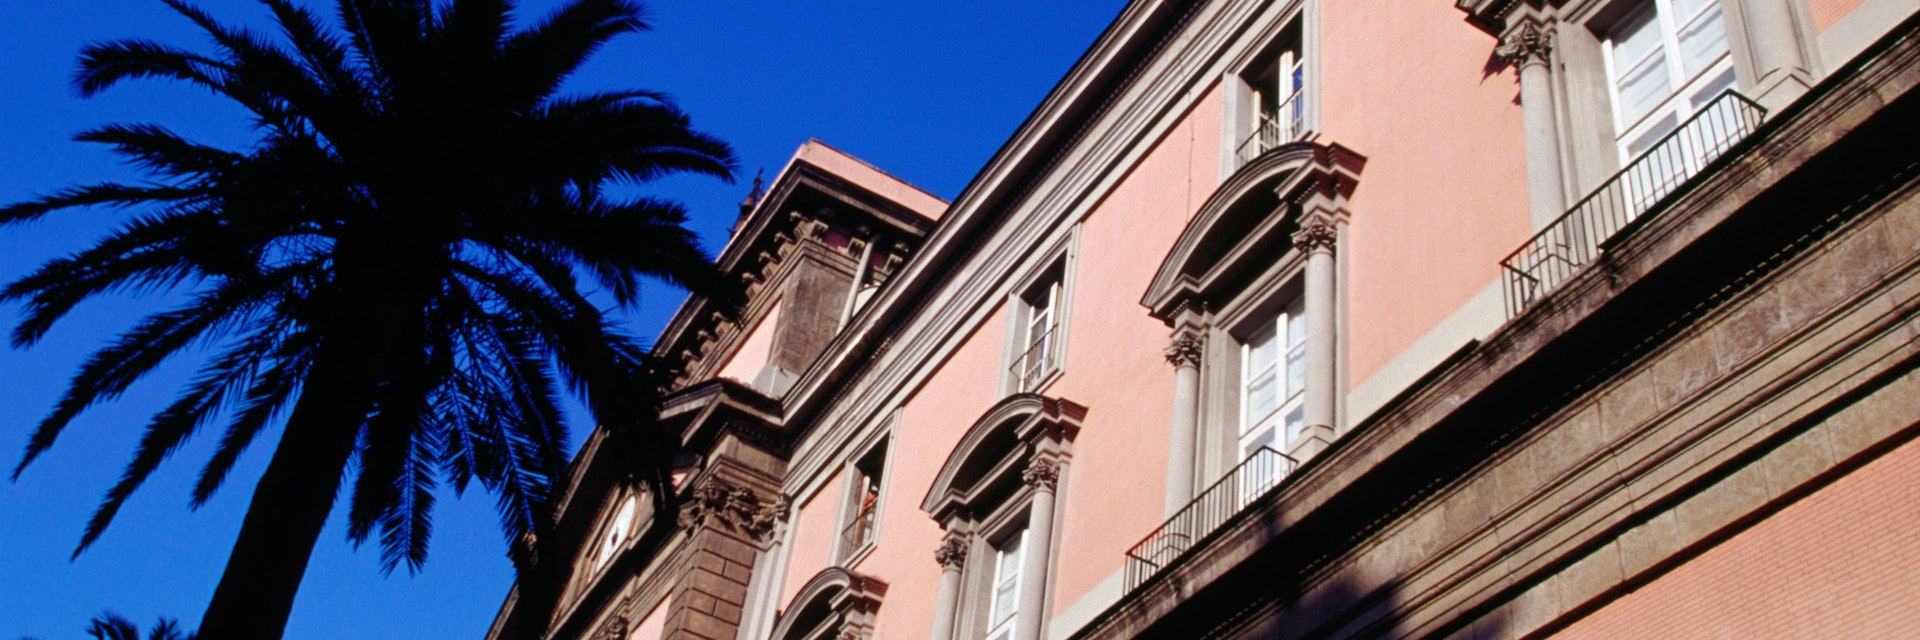 Exterior of Museo Archeologico Nazionale.